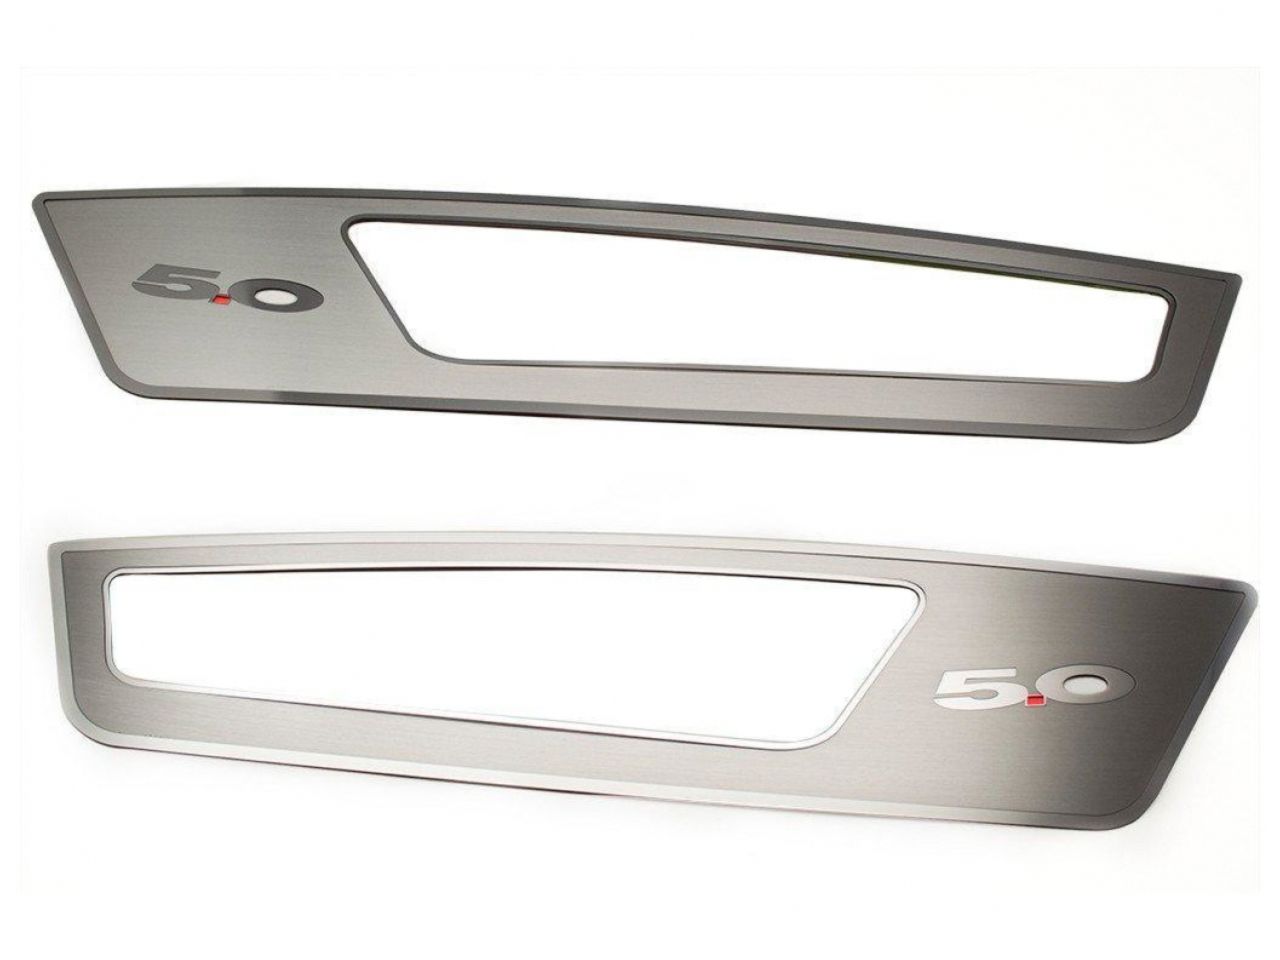 American Car Craft (ACC) 2010-2014 Mustang - Brushed Door Guards with Polished "5.0" Lettering